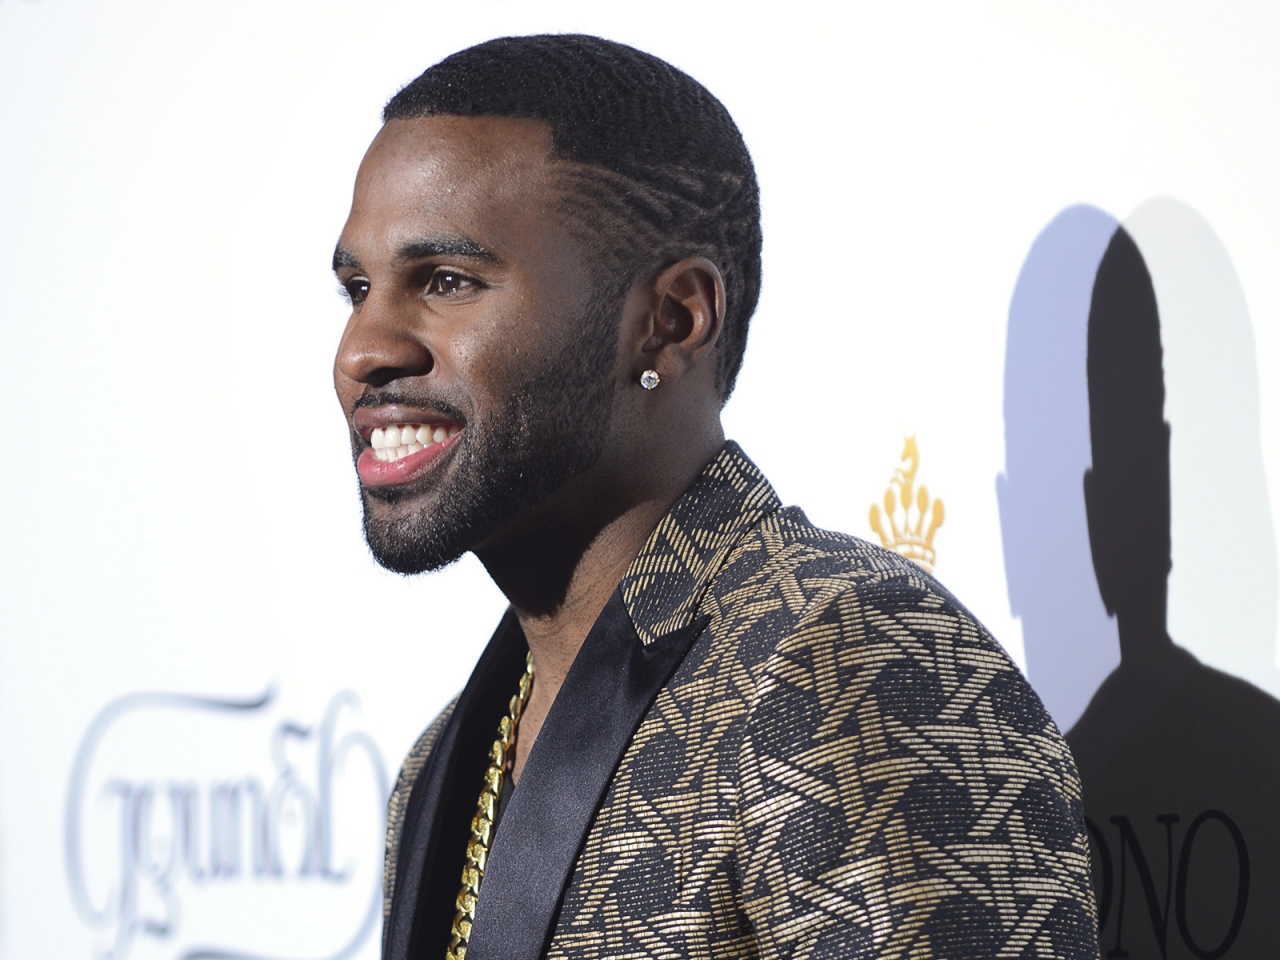 Jason Derulo at Cannes for 1280 x 960 resolution